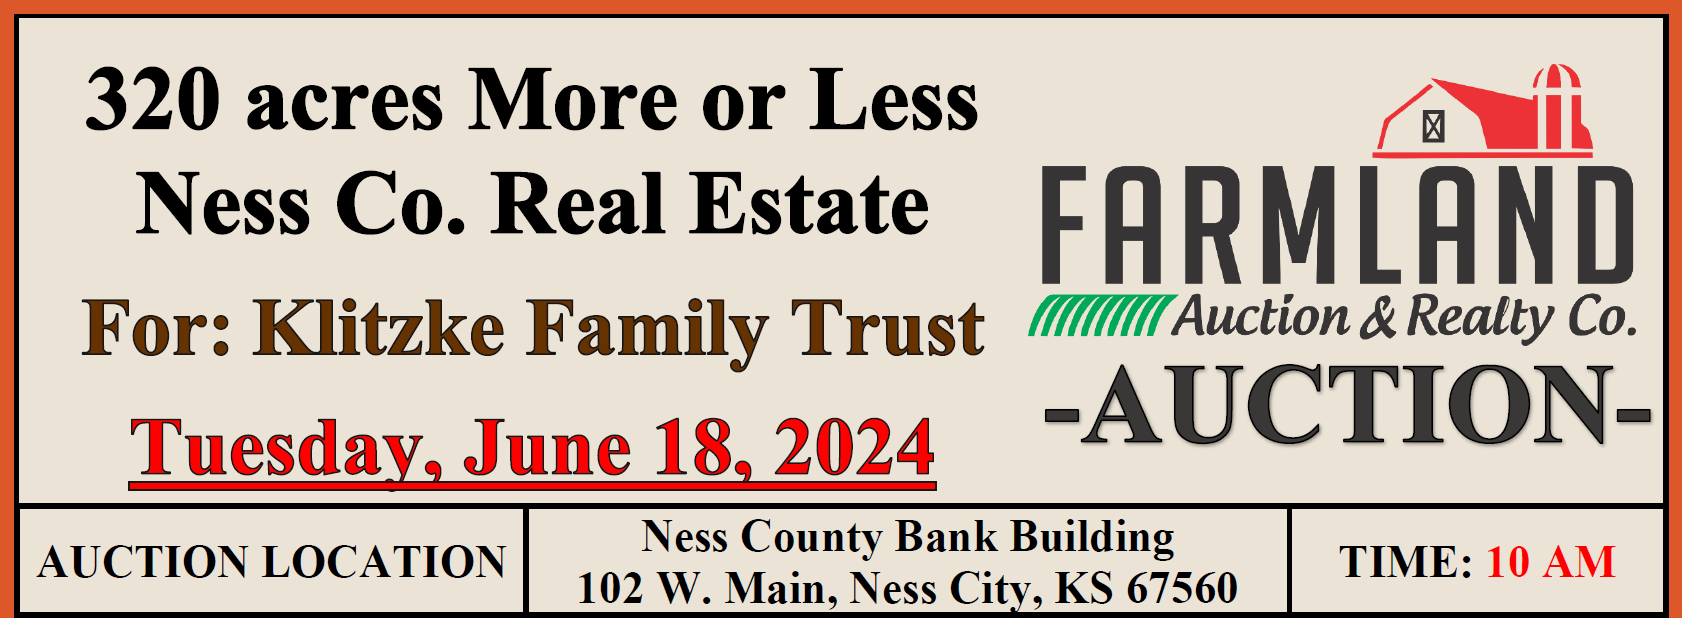 Auction flyer for **UNDER CONTRACT** AUCTION: 320 acres +/- Ness Co. Real Estate